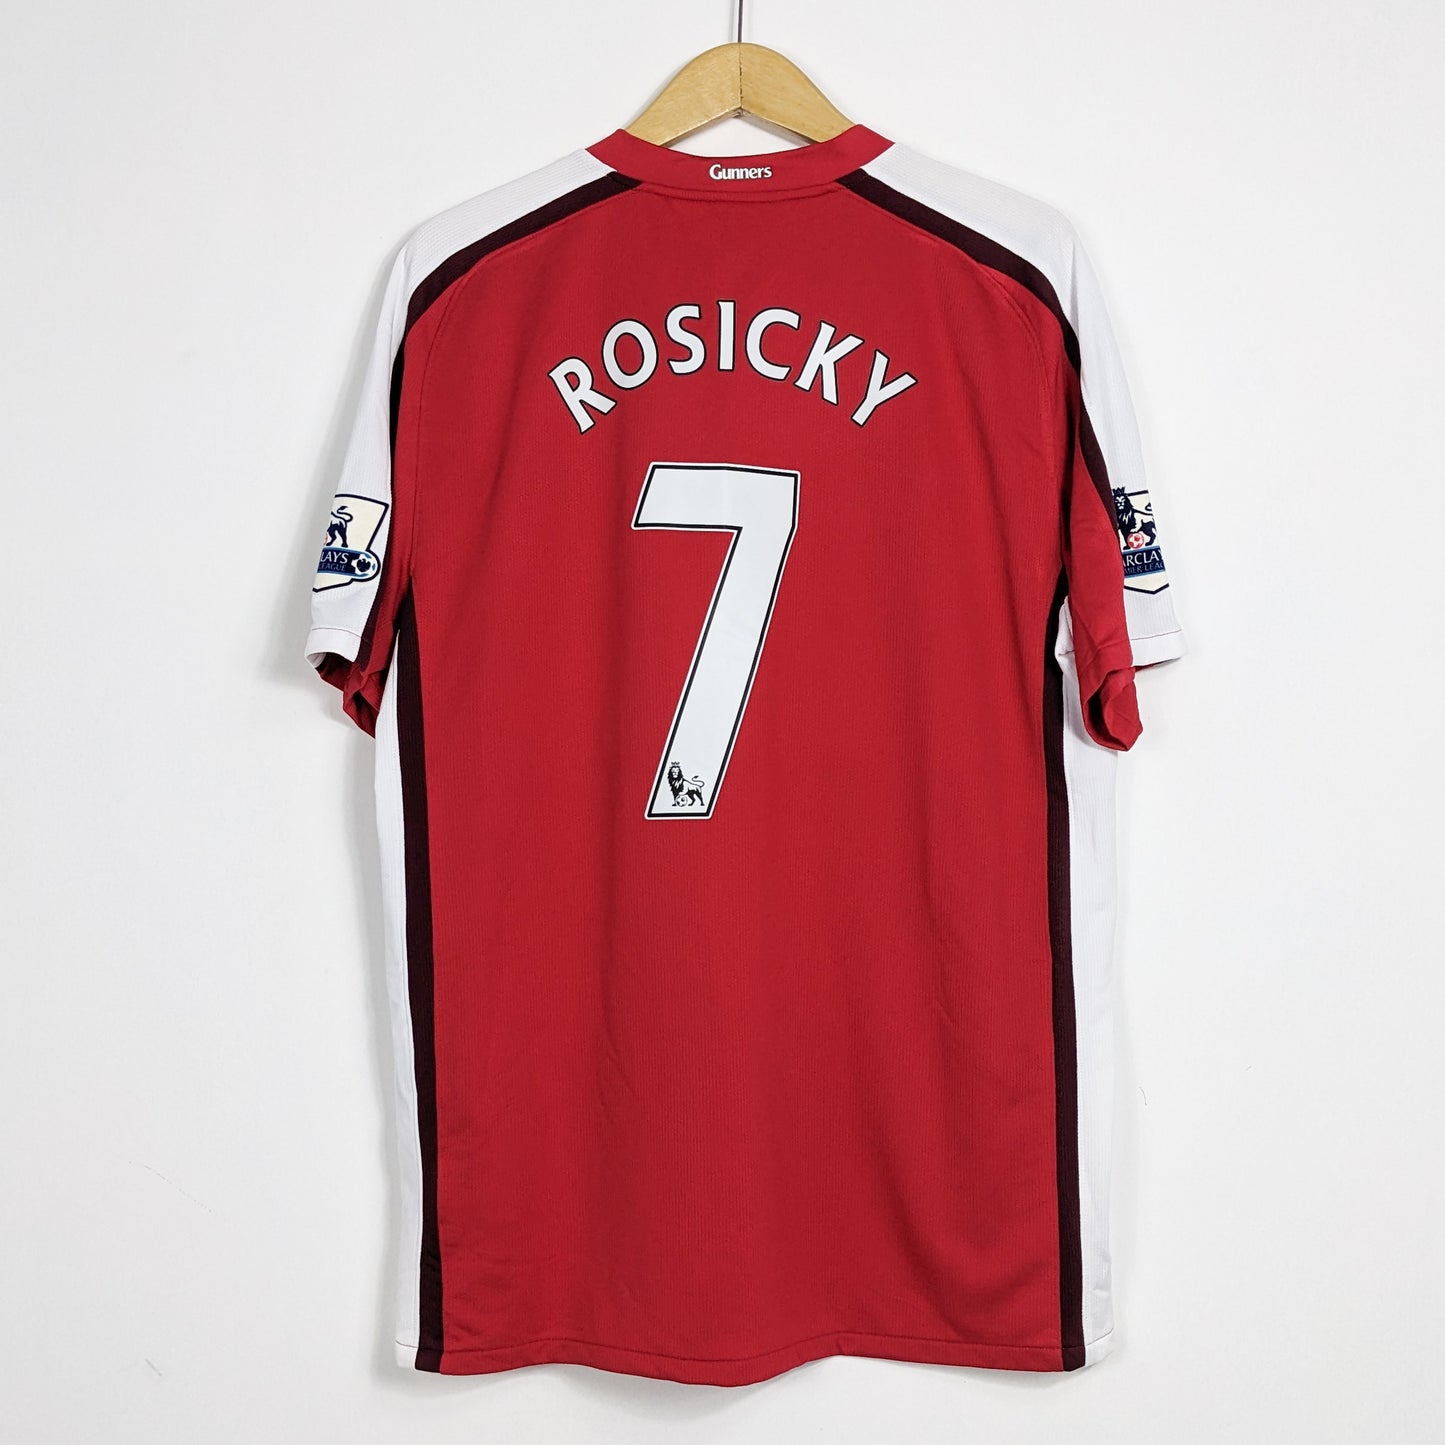 Authentic Arsenal 2008-2010 - Rosicky #14 Size L fit XL